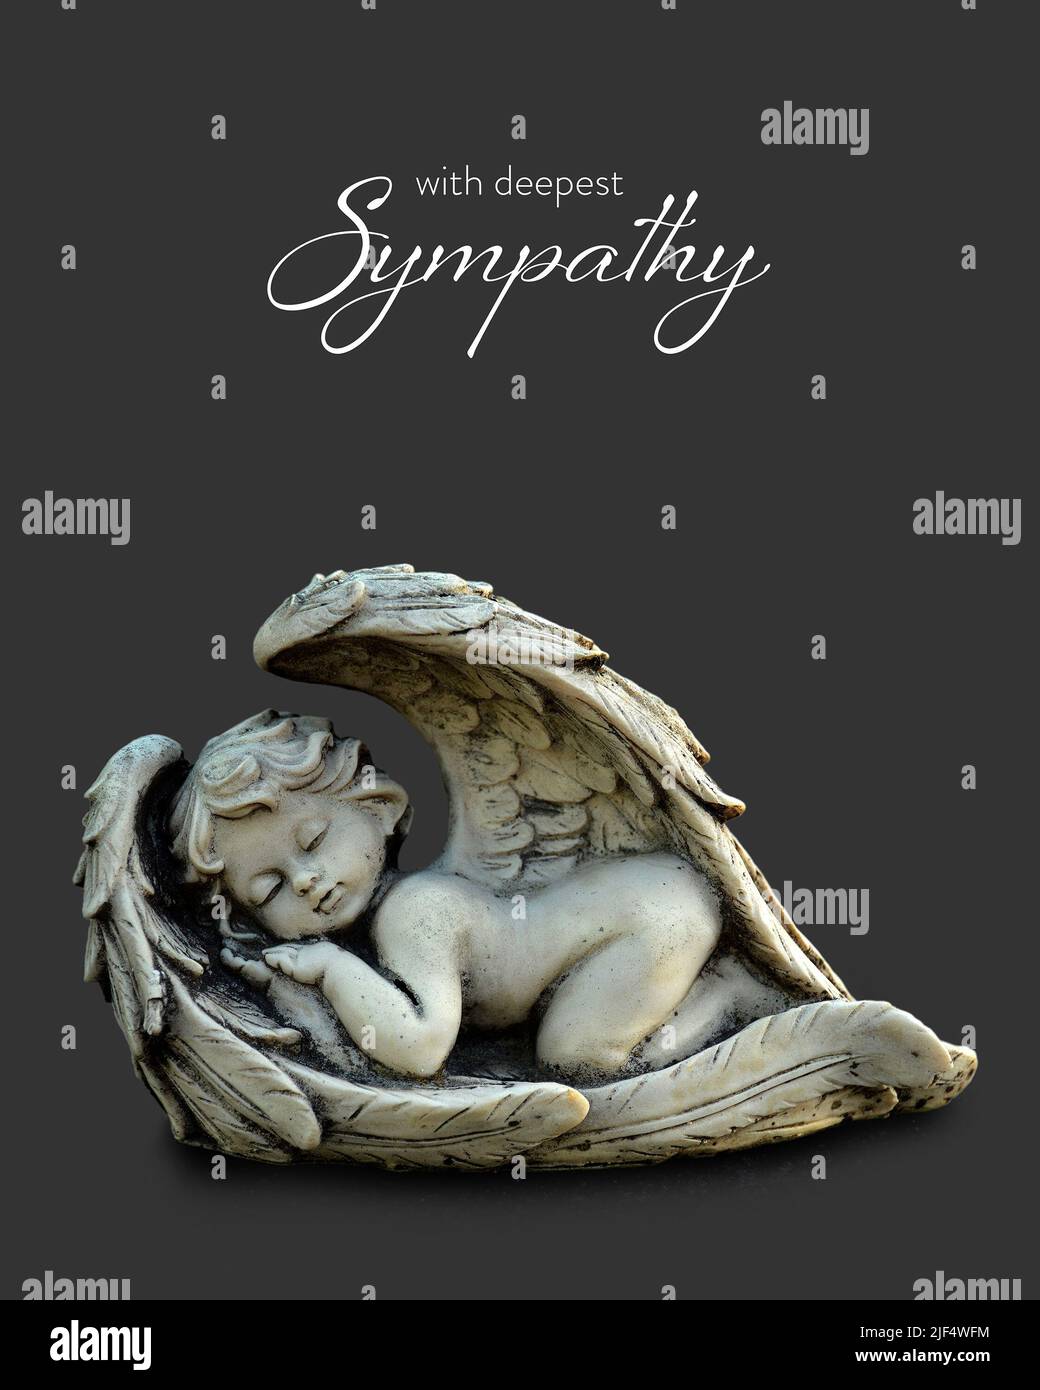 Sympathy card with sleeping angel isolated on gray background Stock Photo